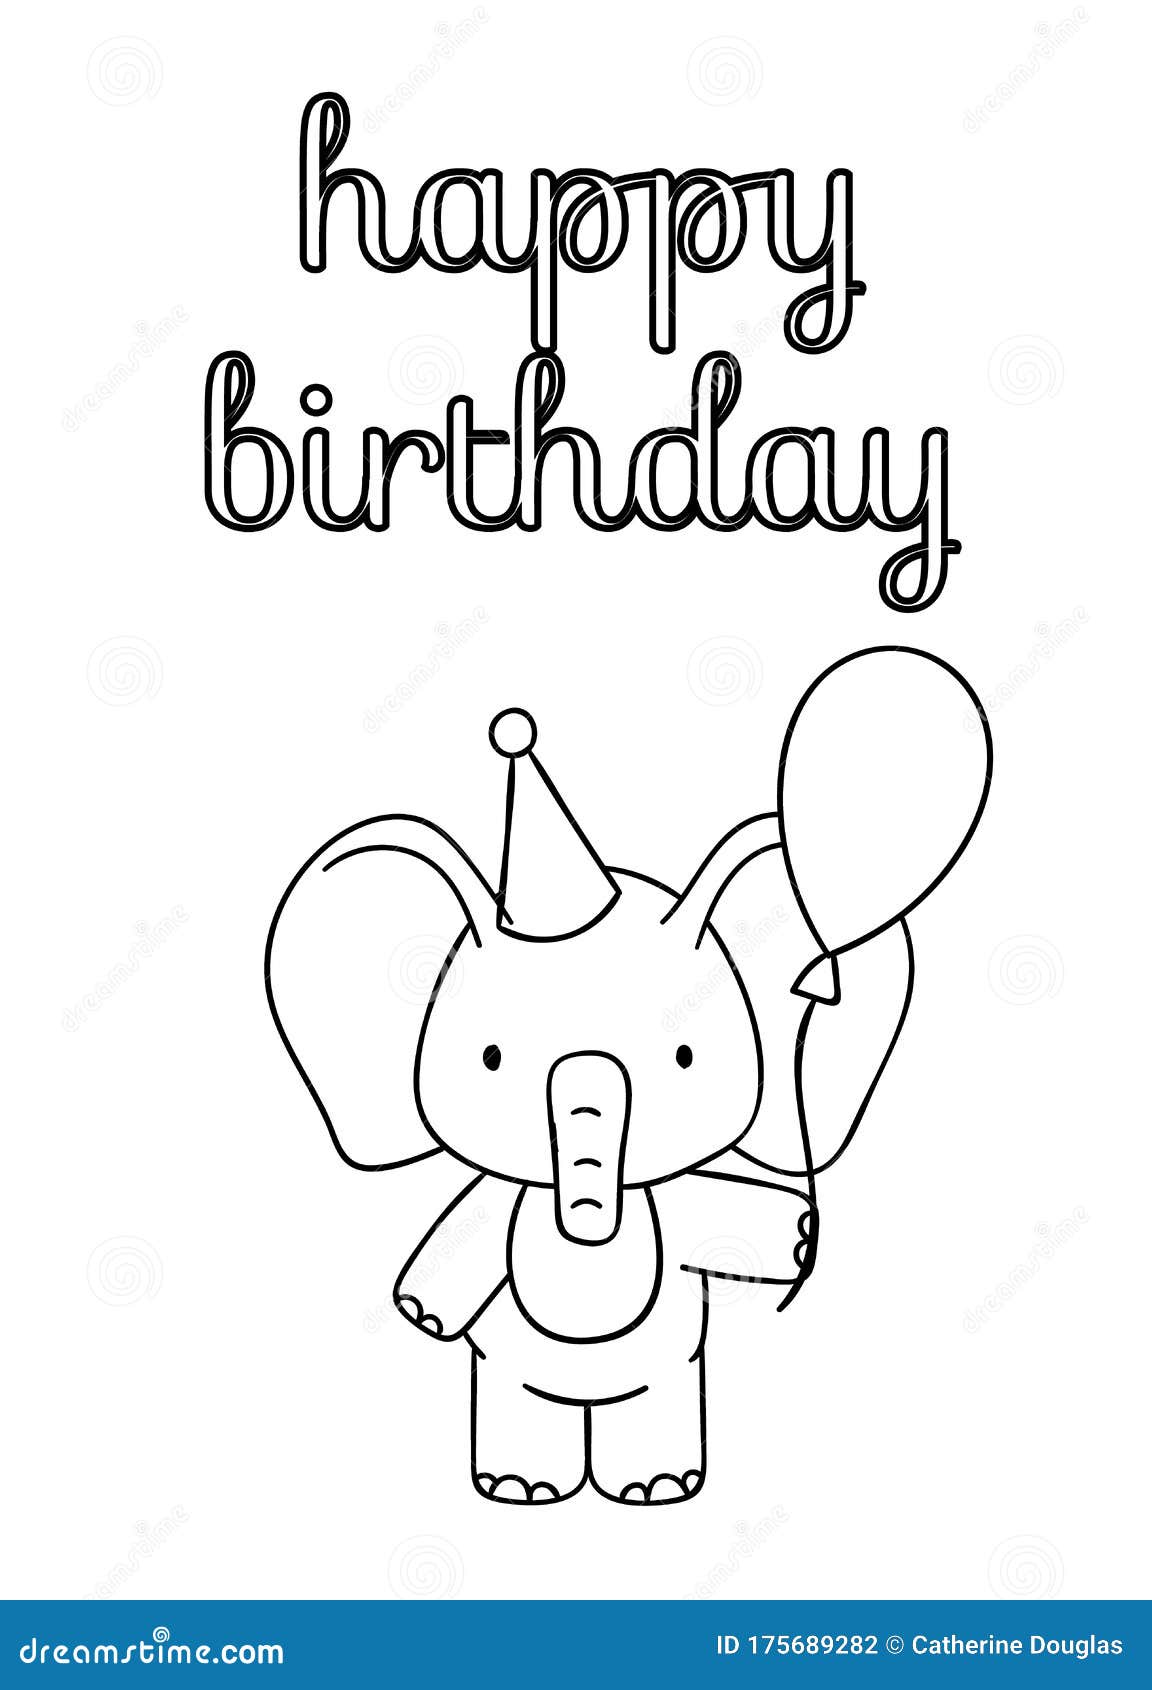 Download Coloring Pages, Black And White Cute Hand Drawn Elephant ...